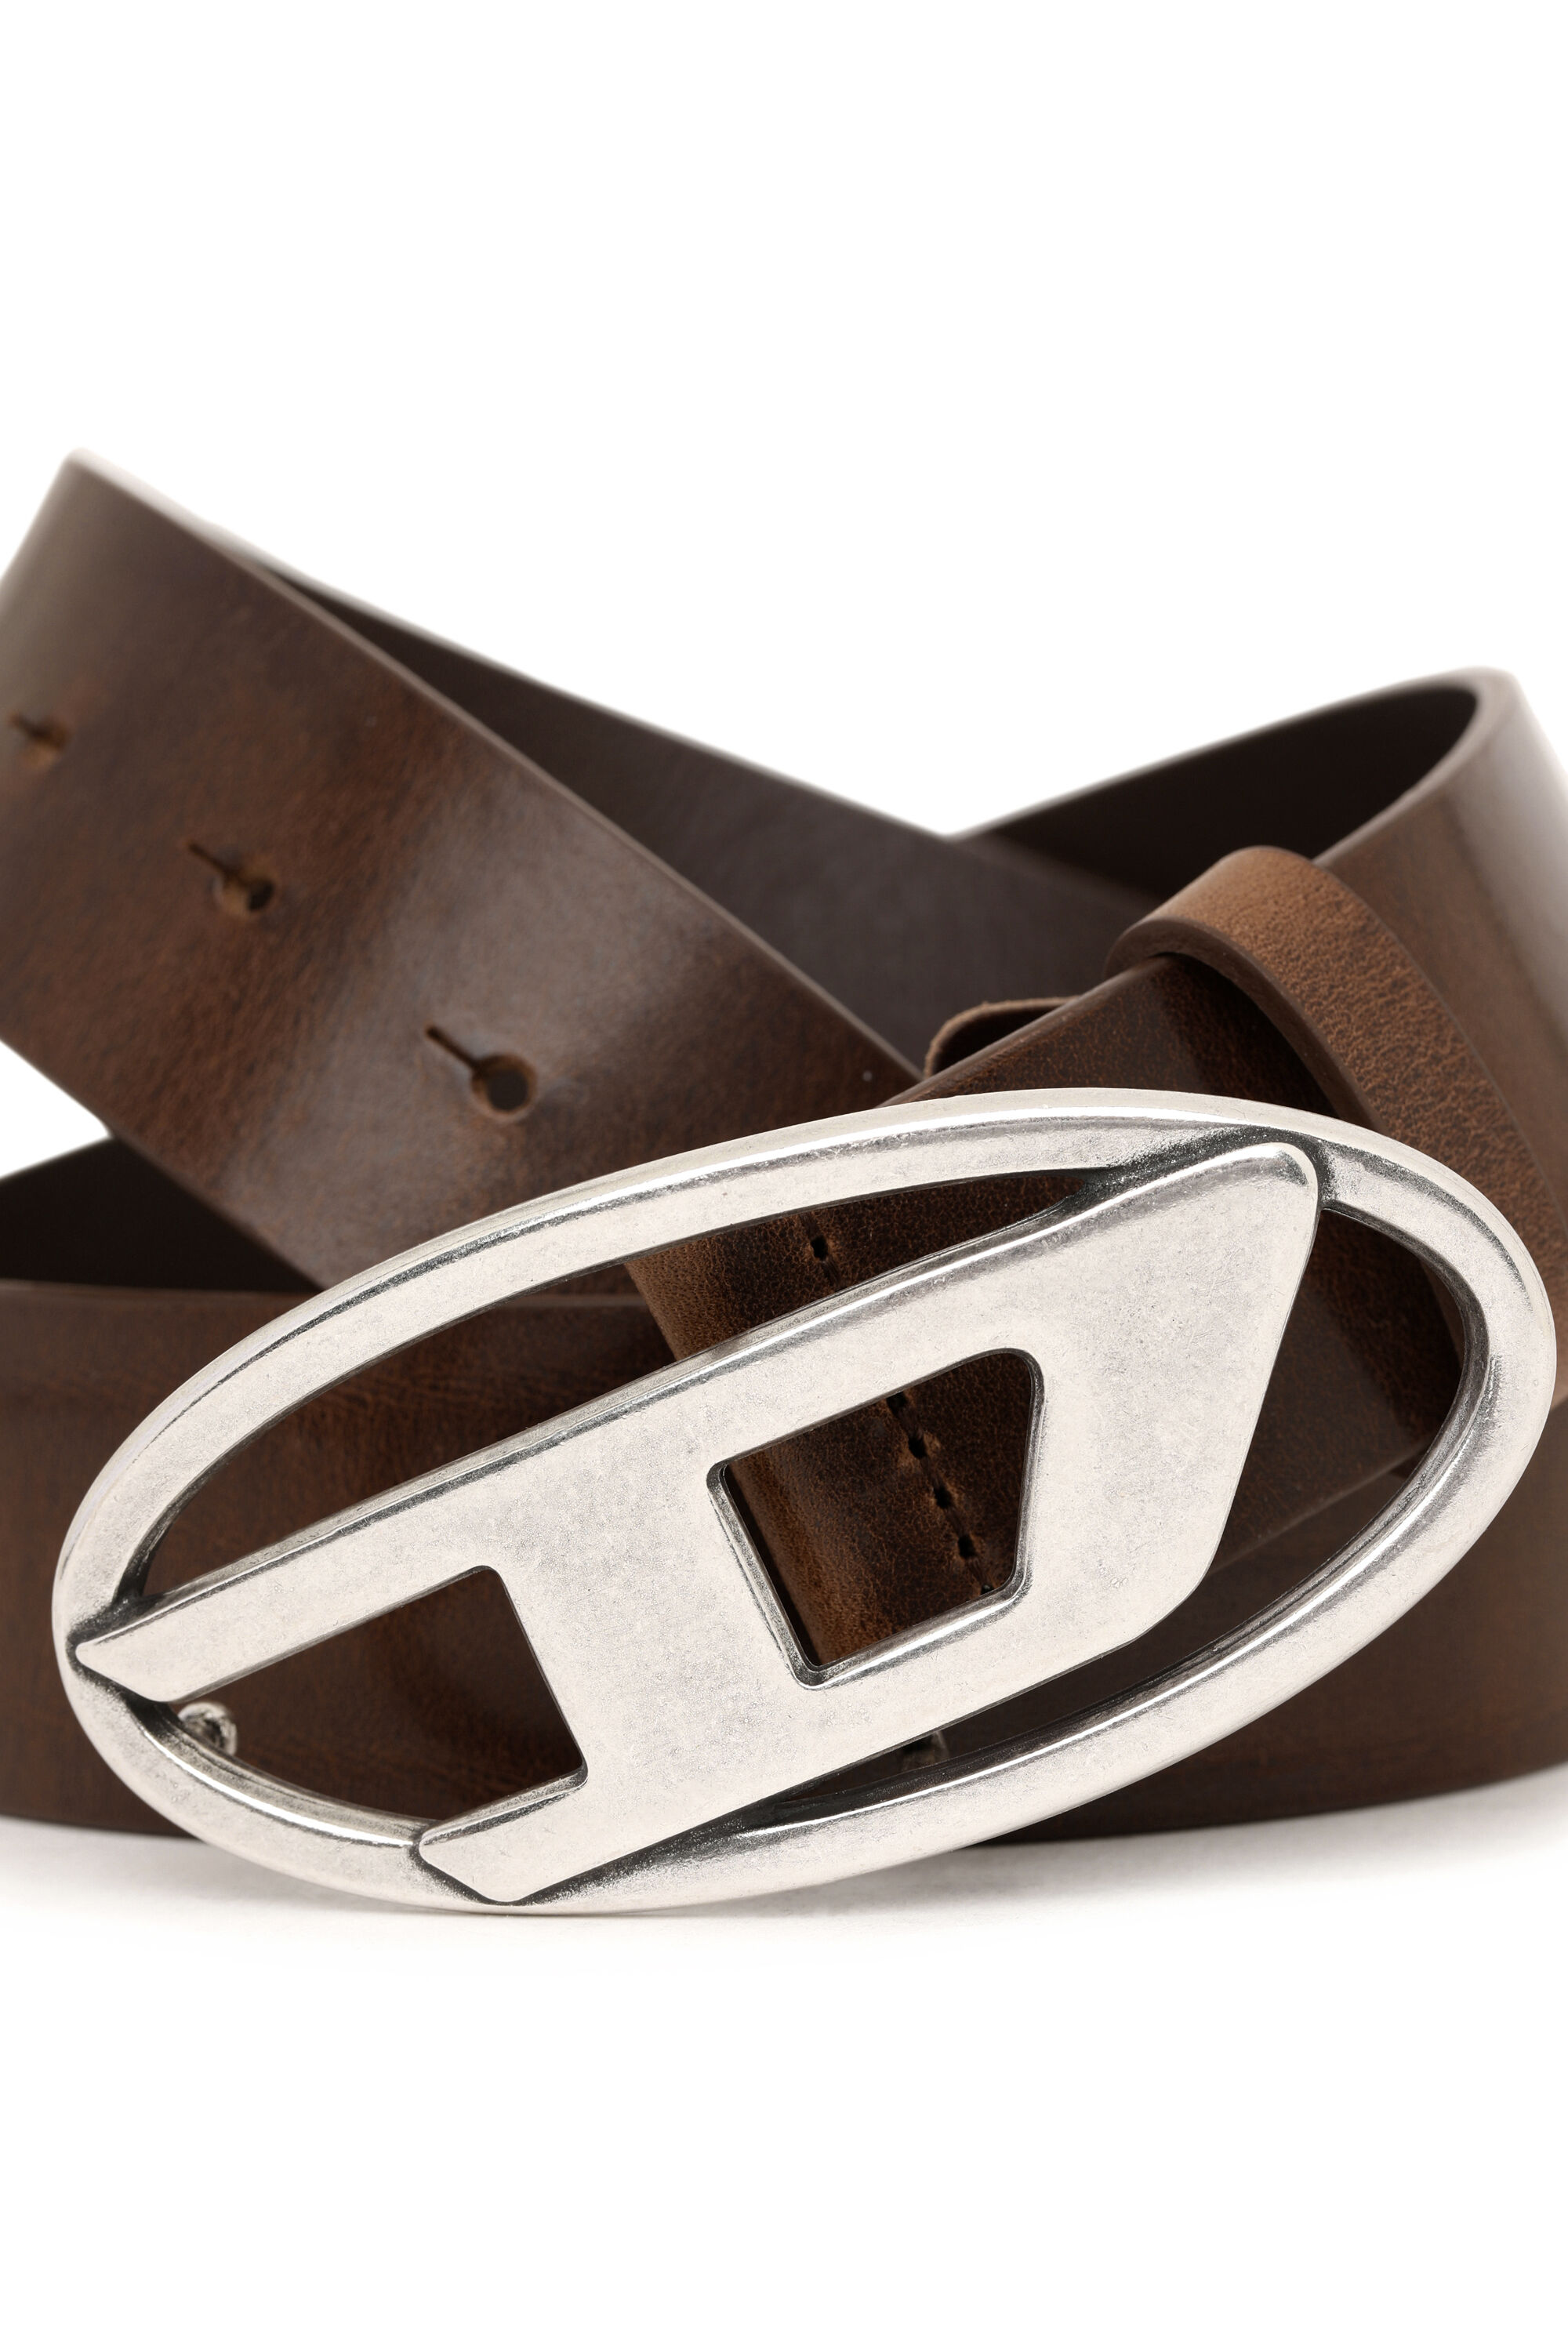 B-1DR: Leather Belt with silver D logo buckle | Diesel